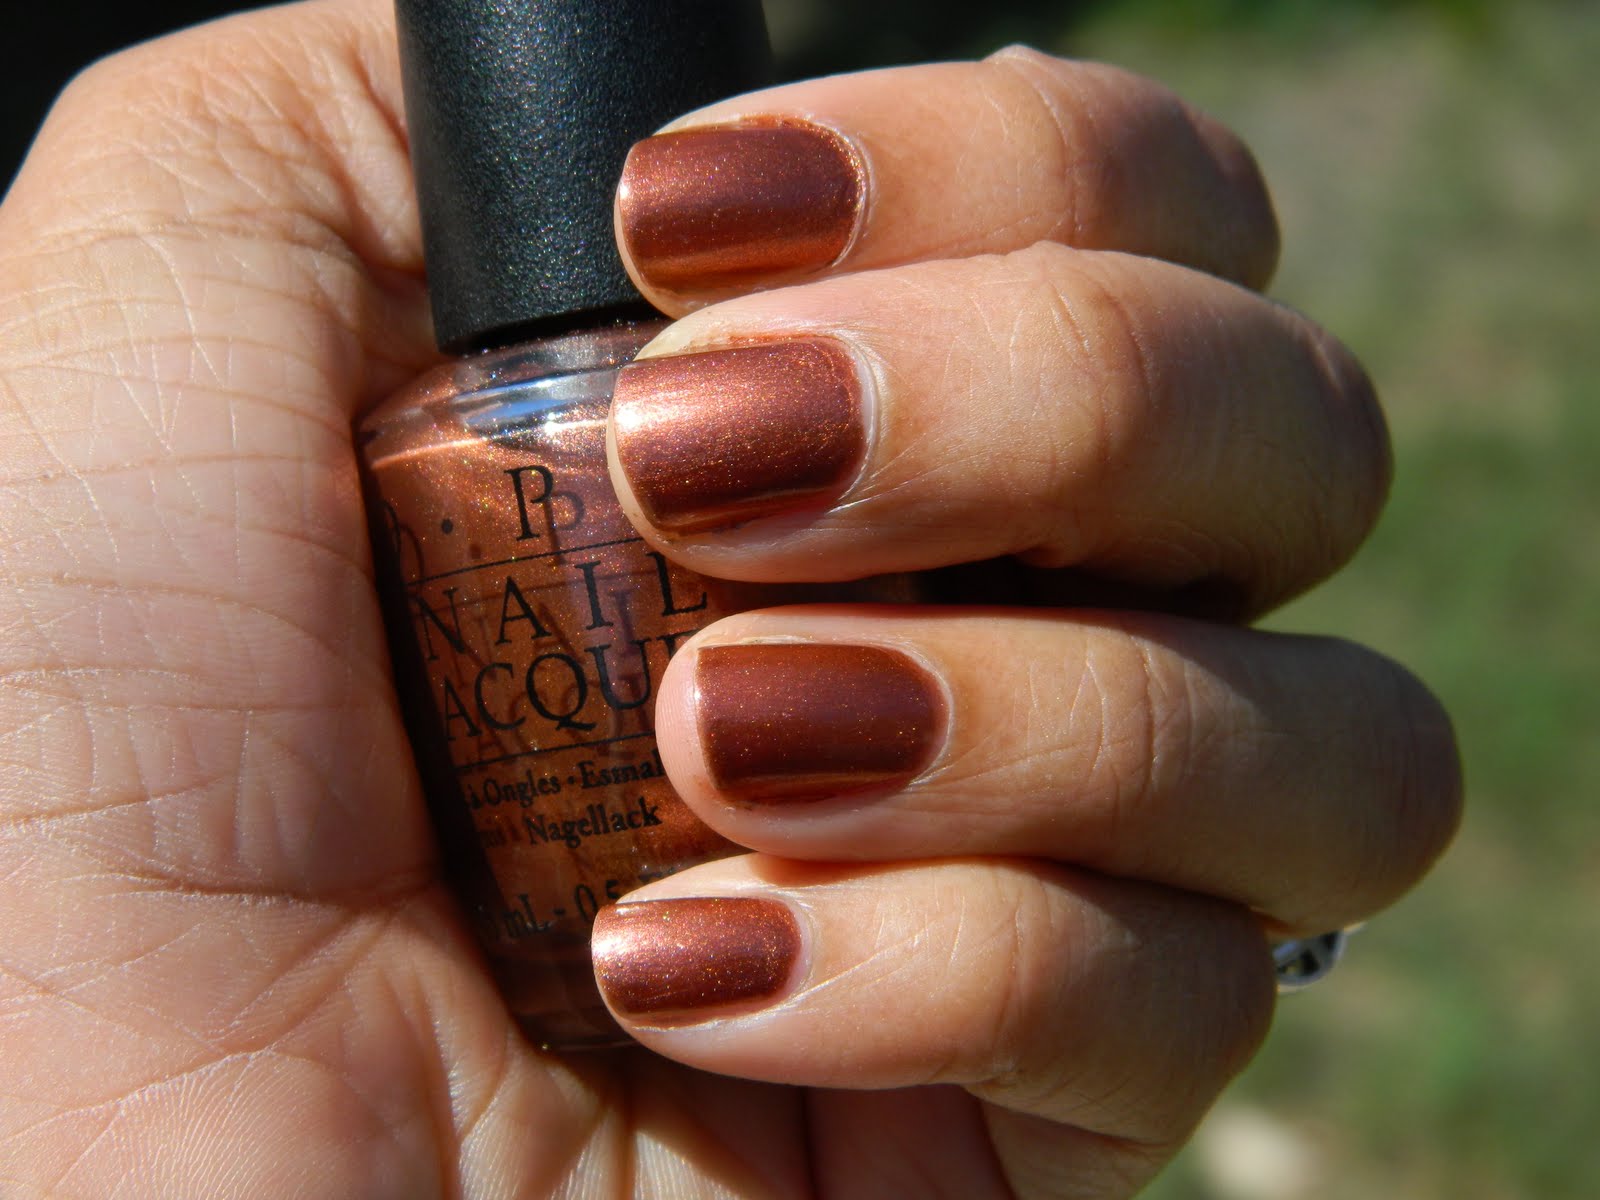 5. OPI Nail Lacquer in "Brisbane Bronze" - wide 9